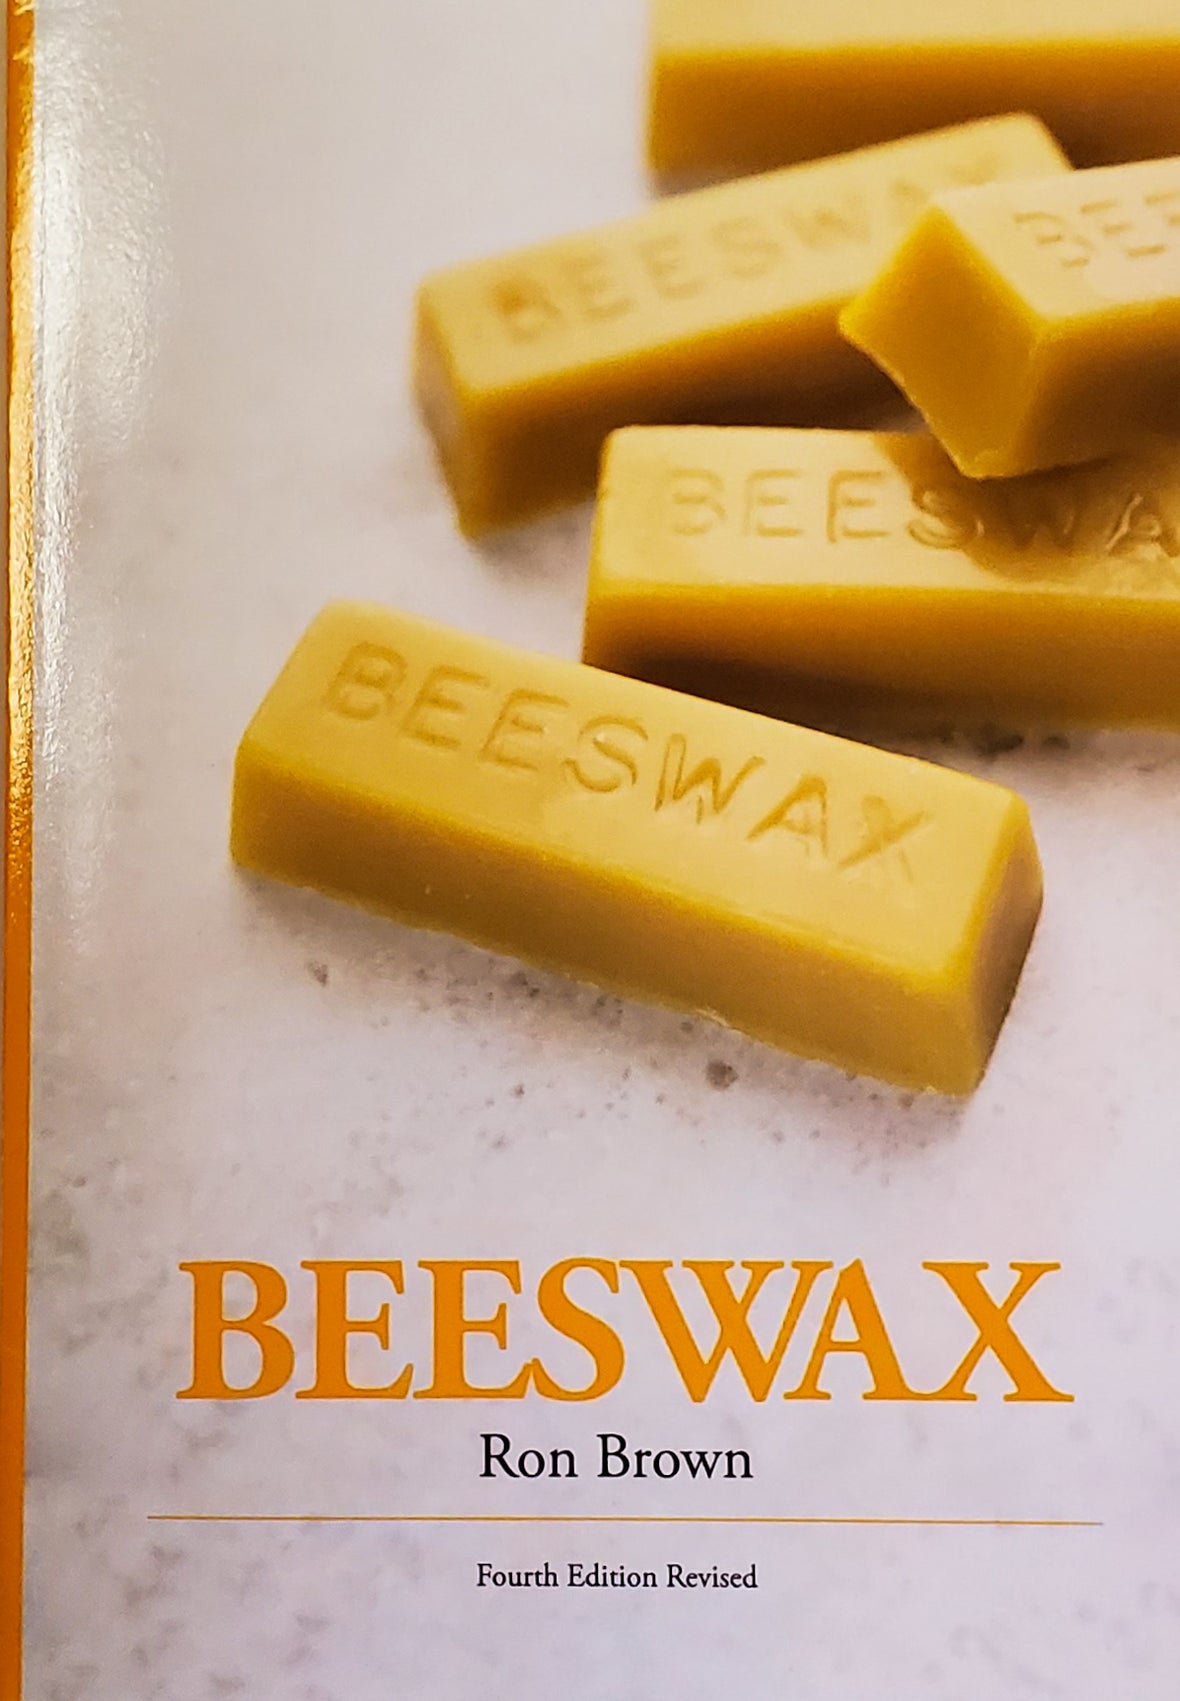 Book: Beeswax, 4th Edition Revised